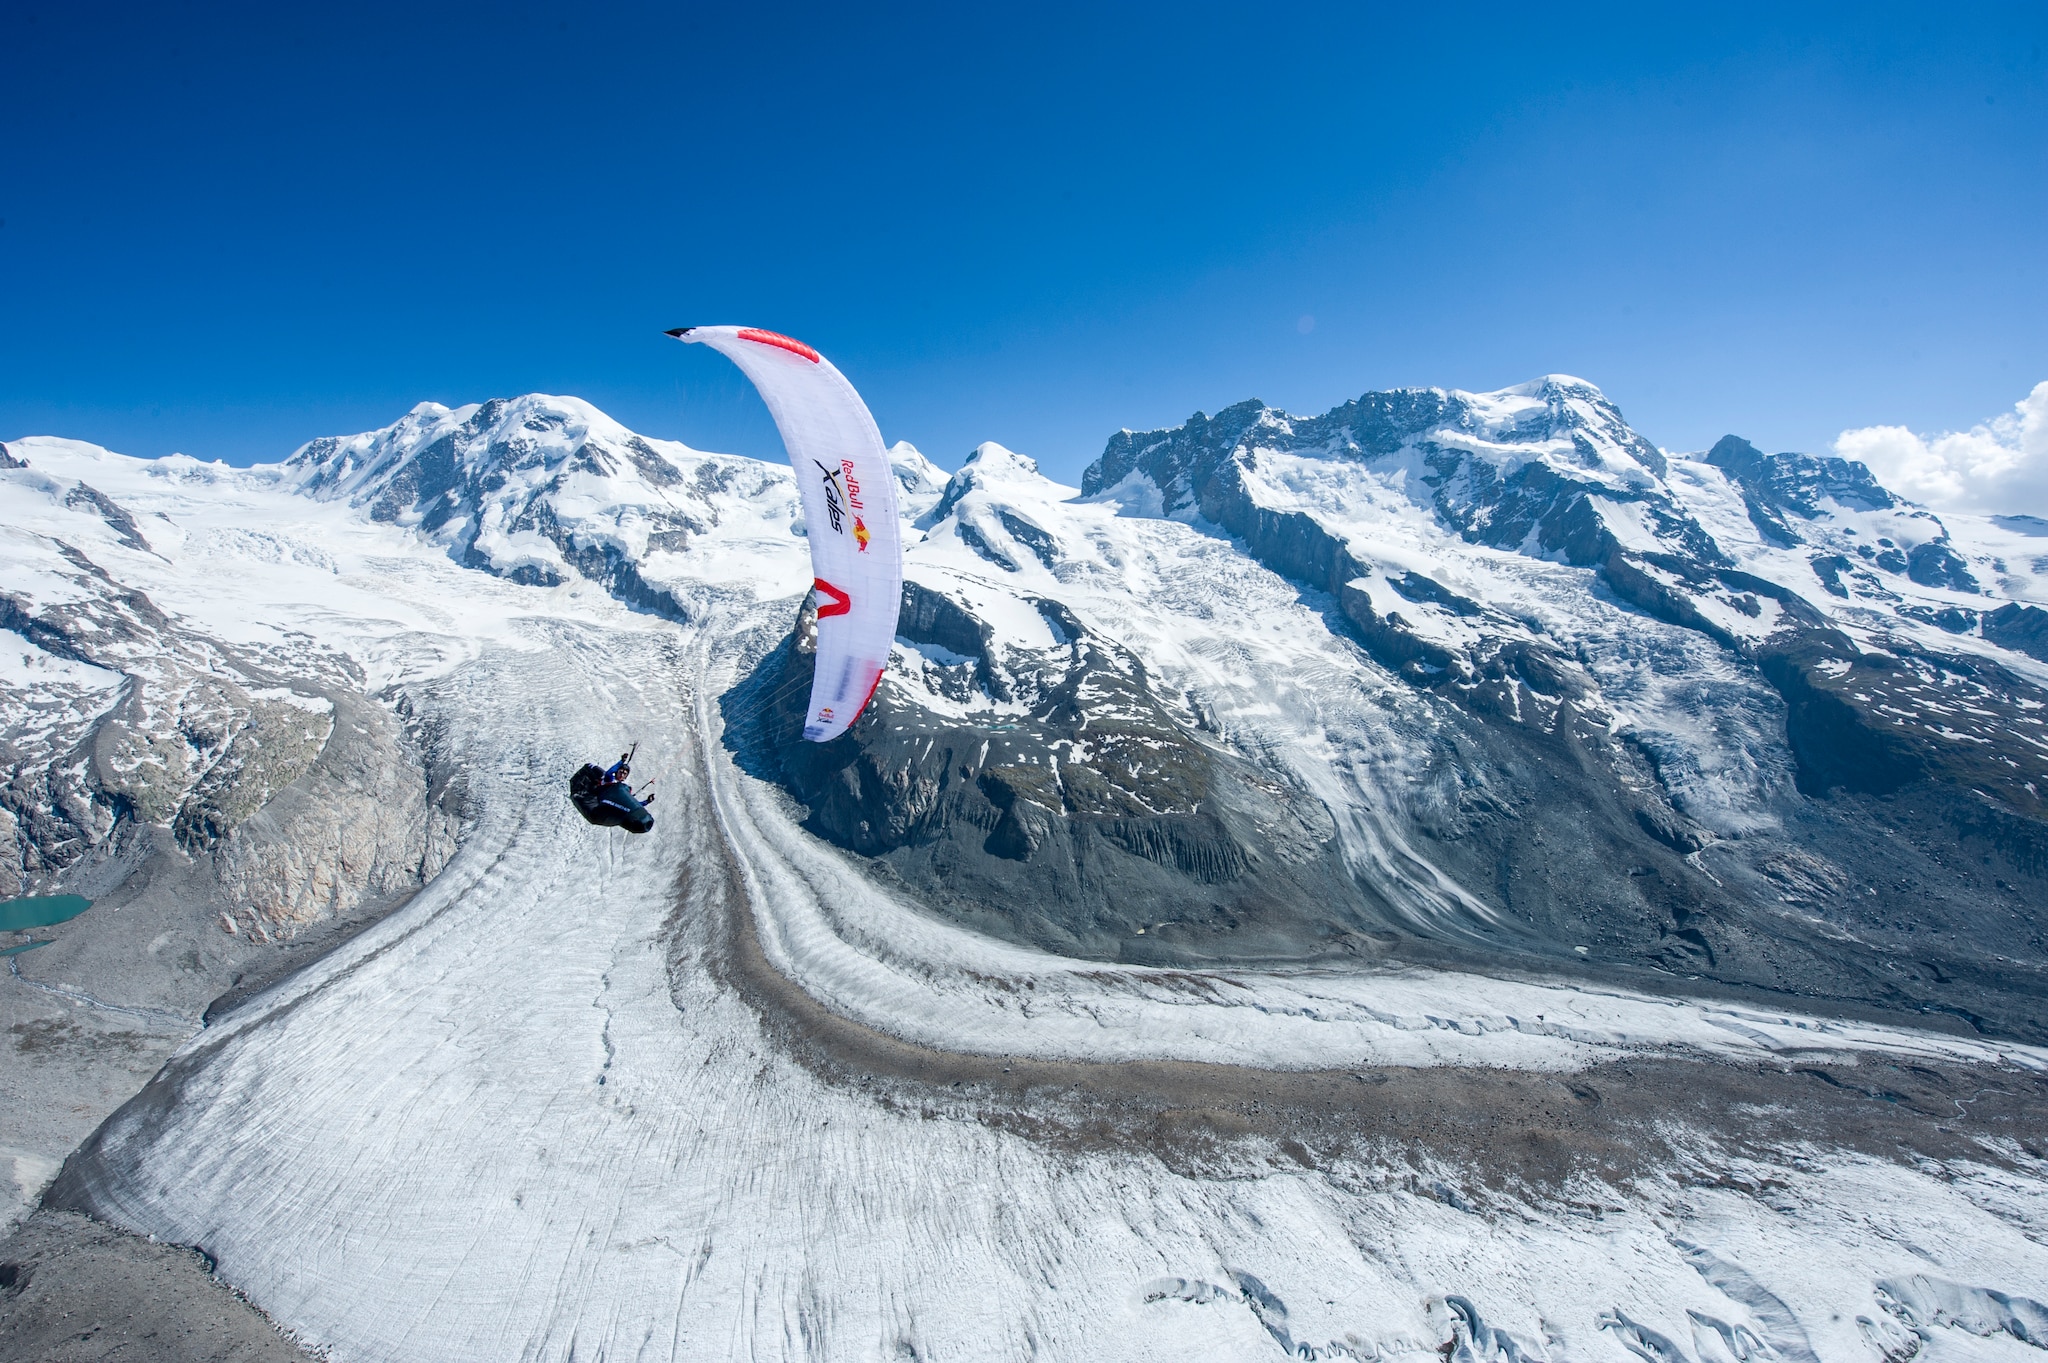 Participant flies during the Red Bull X-Alps preparations in Zermatt, Switzerland on June 19, 2017 // Felix Woelk/Red Bull Content Pool // SI201903080173 // Usage for editorial use only //